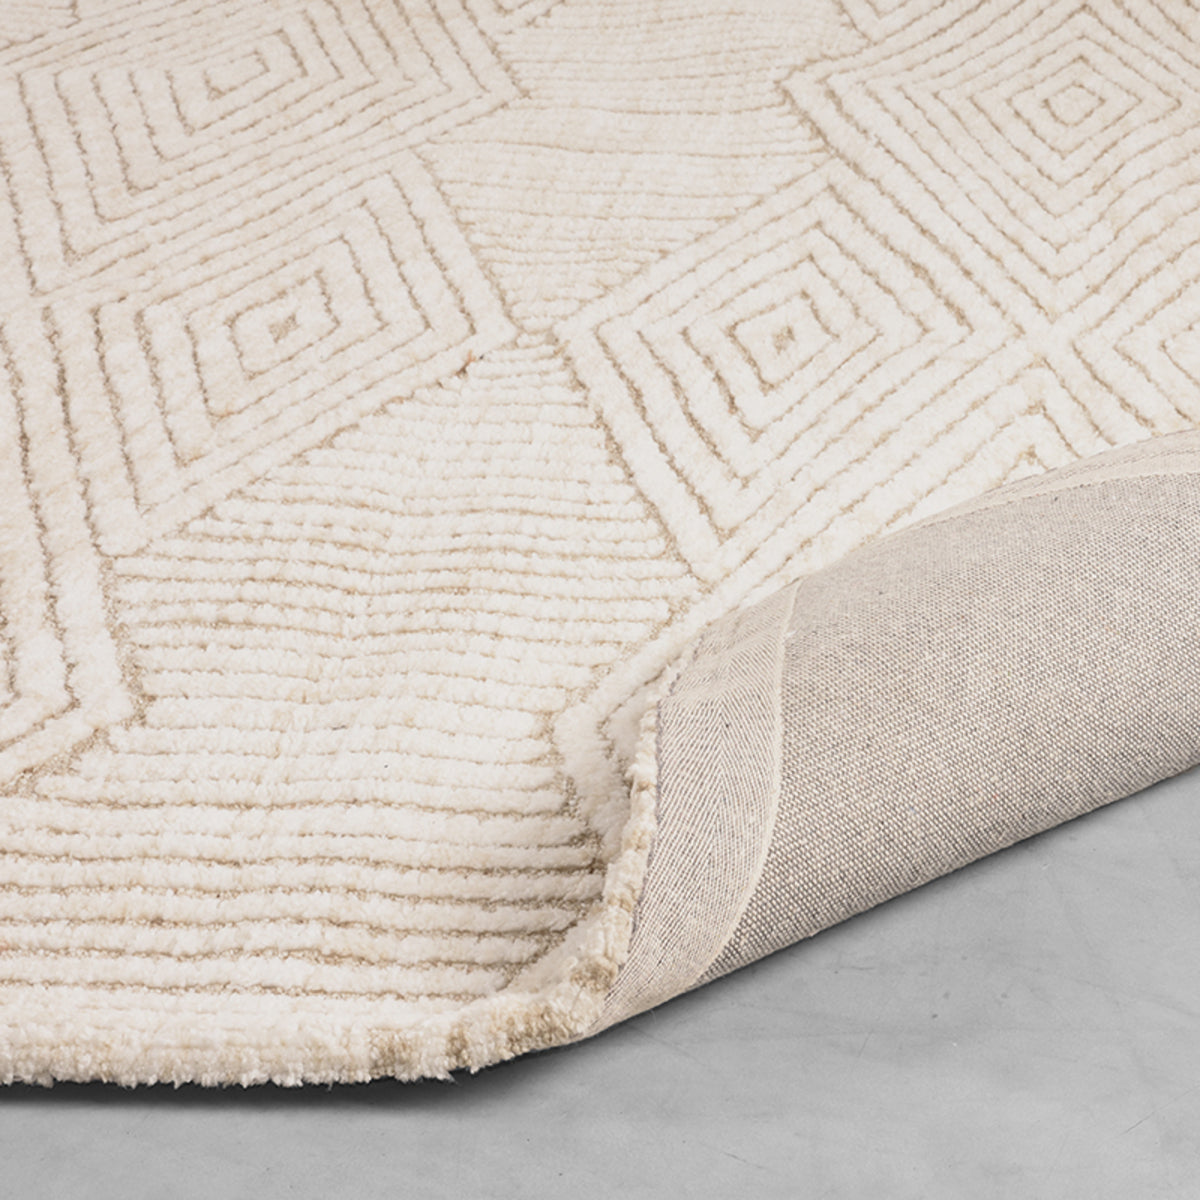 LABEL51 Rugs Cozy - Taupe - Synthetic - 200x300 cm